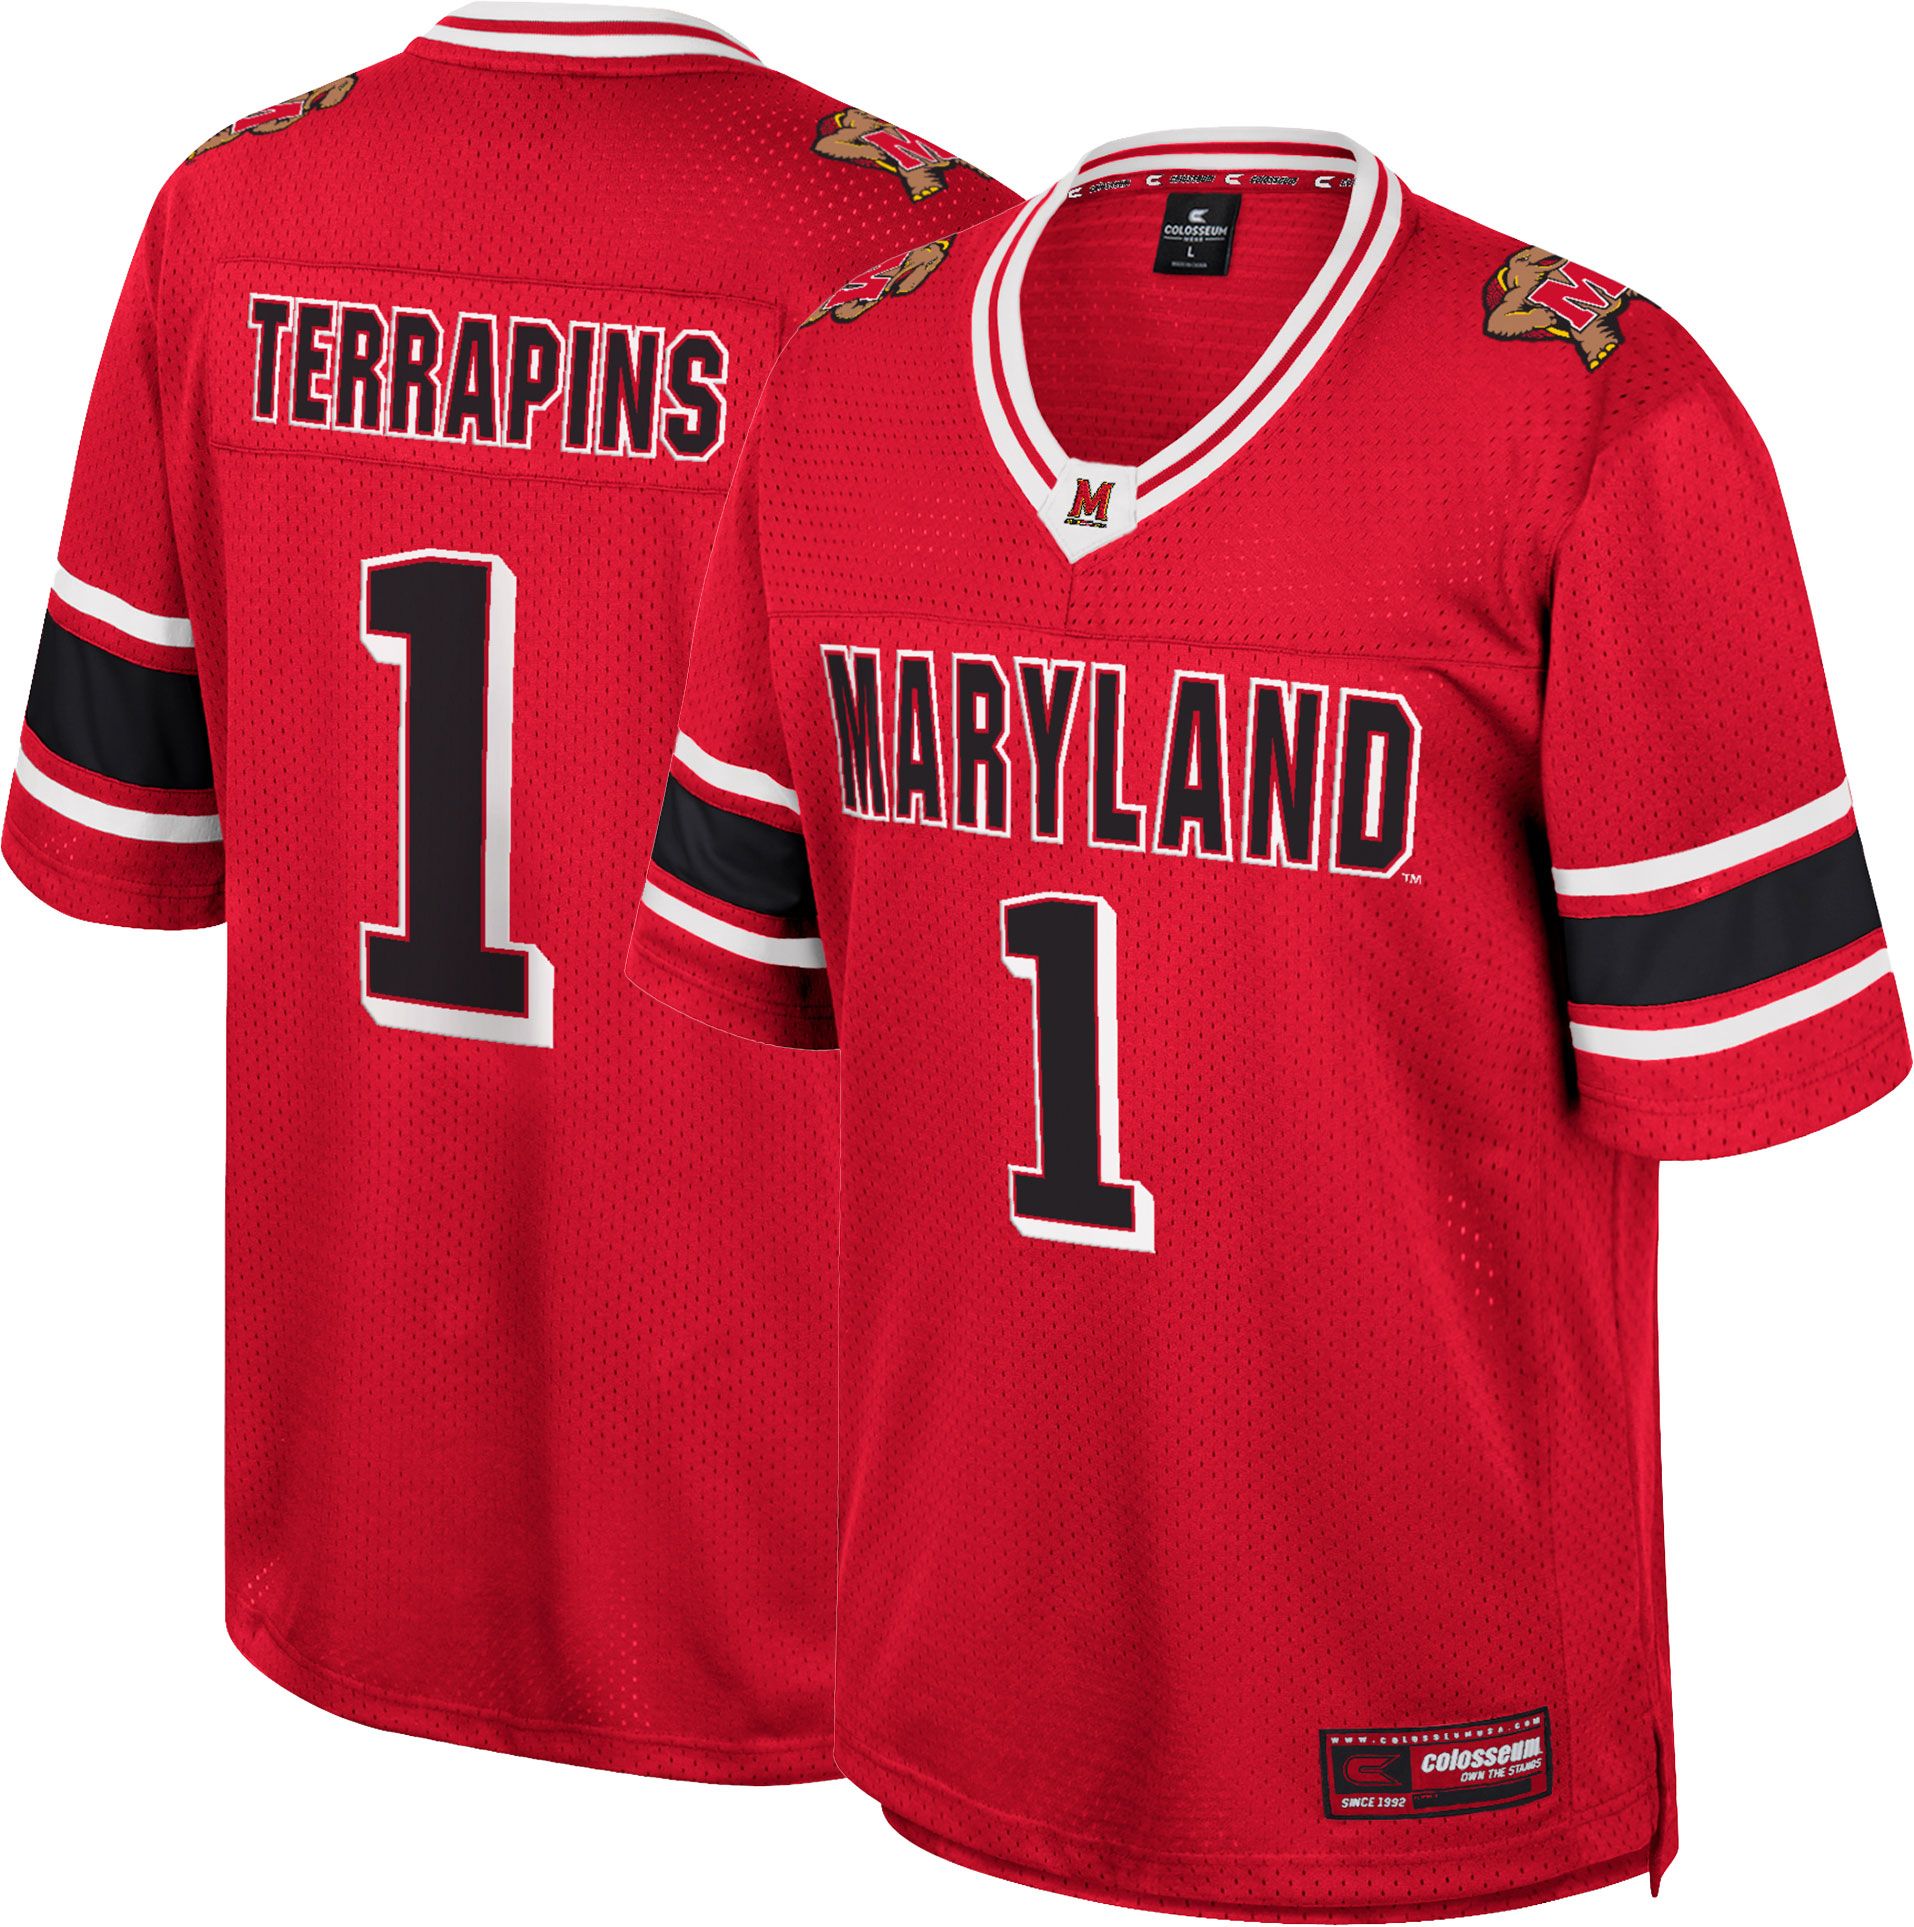 Maryland Terrapins throwback soccer jersey